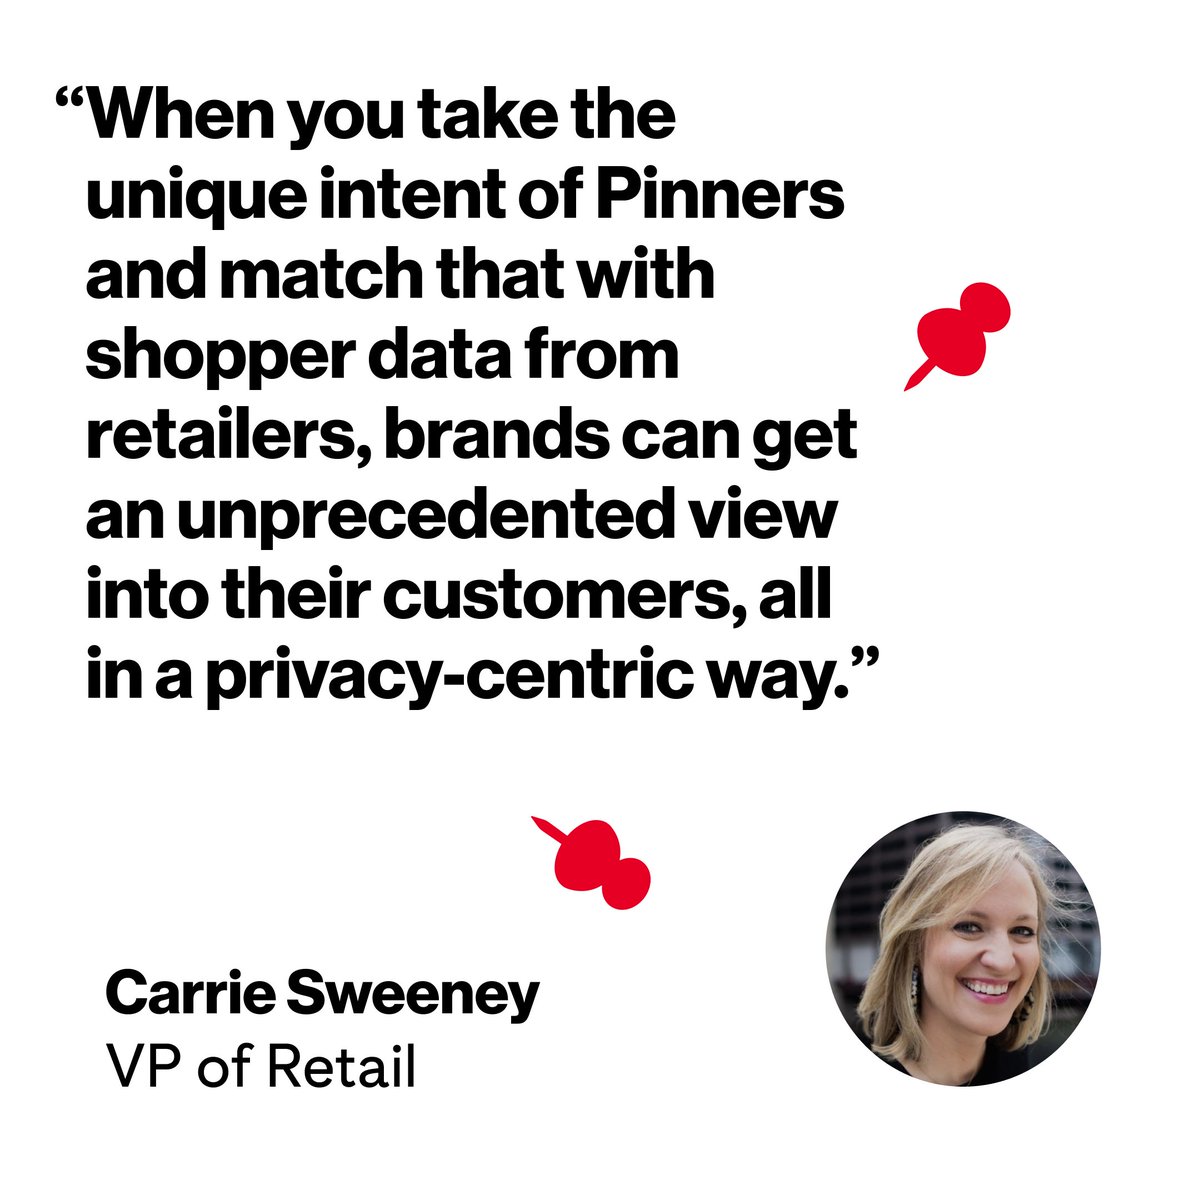 Today at @shoptalk, Carrie Sweeney, Pinterest's VP of Retail, spoke on the future of retail media and clean room technology.